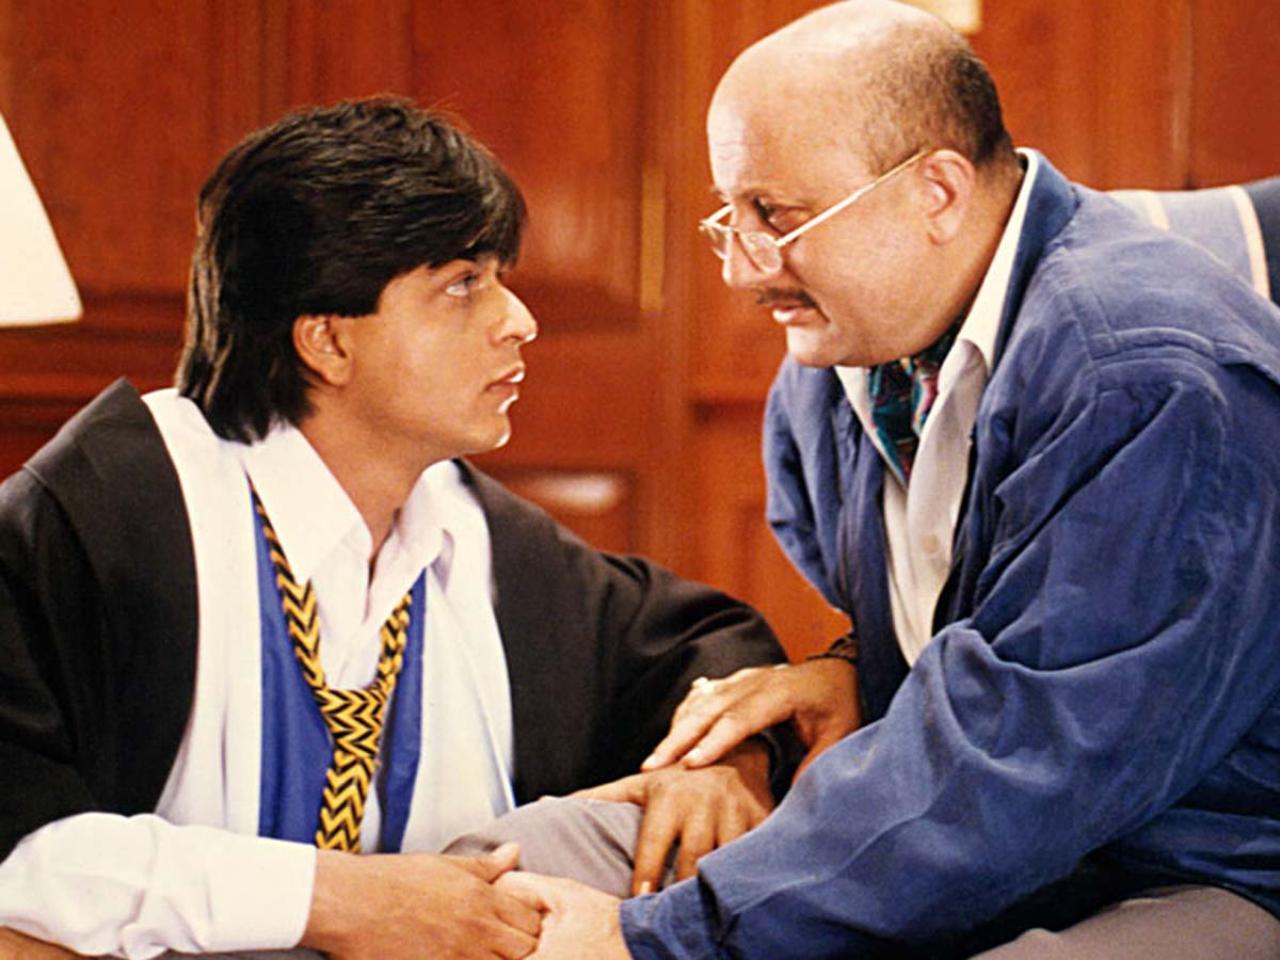 Dilwale Dulhania Le Jaayenge (1995)
Anupam Kher and Shah Rukh Khan are friend-like father-son duo. From not dismissing him for failing class to helping him pursue the woman of his dreams, Kher's character is his father and friend